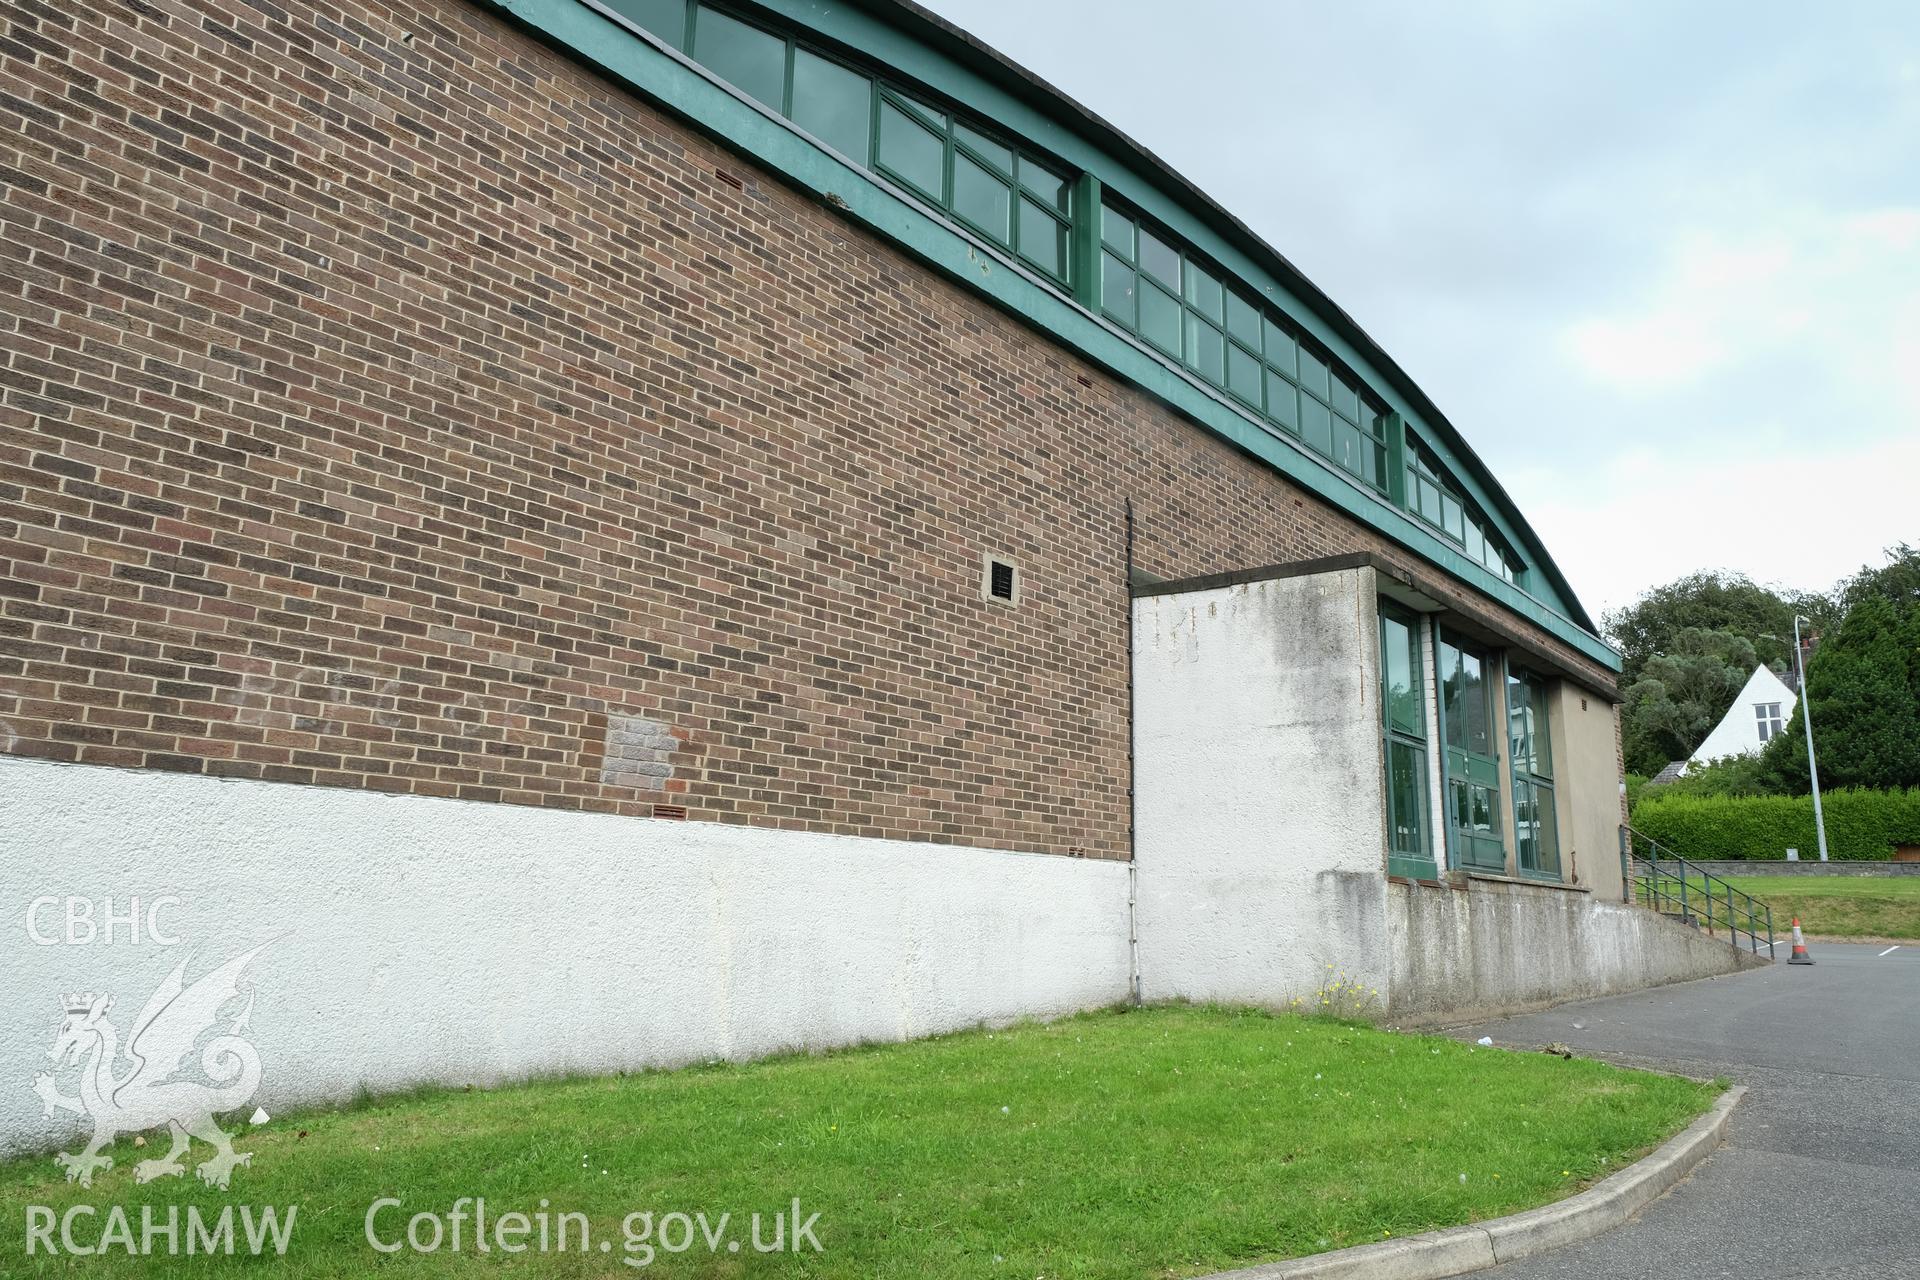 Digital colour photograph showing detailed exterior view from the side of entrance to Caernarfonshire Technical College, Ffriddoedd Road, Bangor. Photographed by Dilys Morgan, donated by Wyn Thomas of Grwp Llandrillo-Menai Further Education College, 2019.